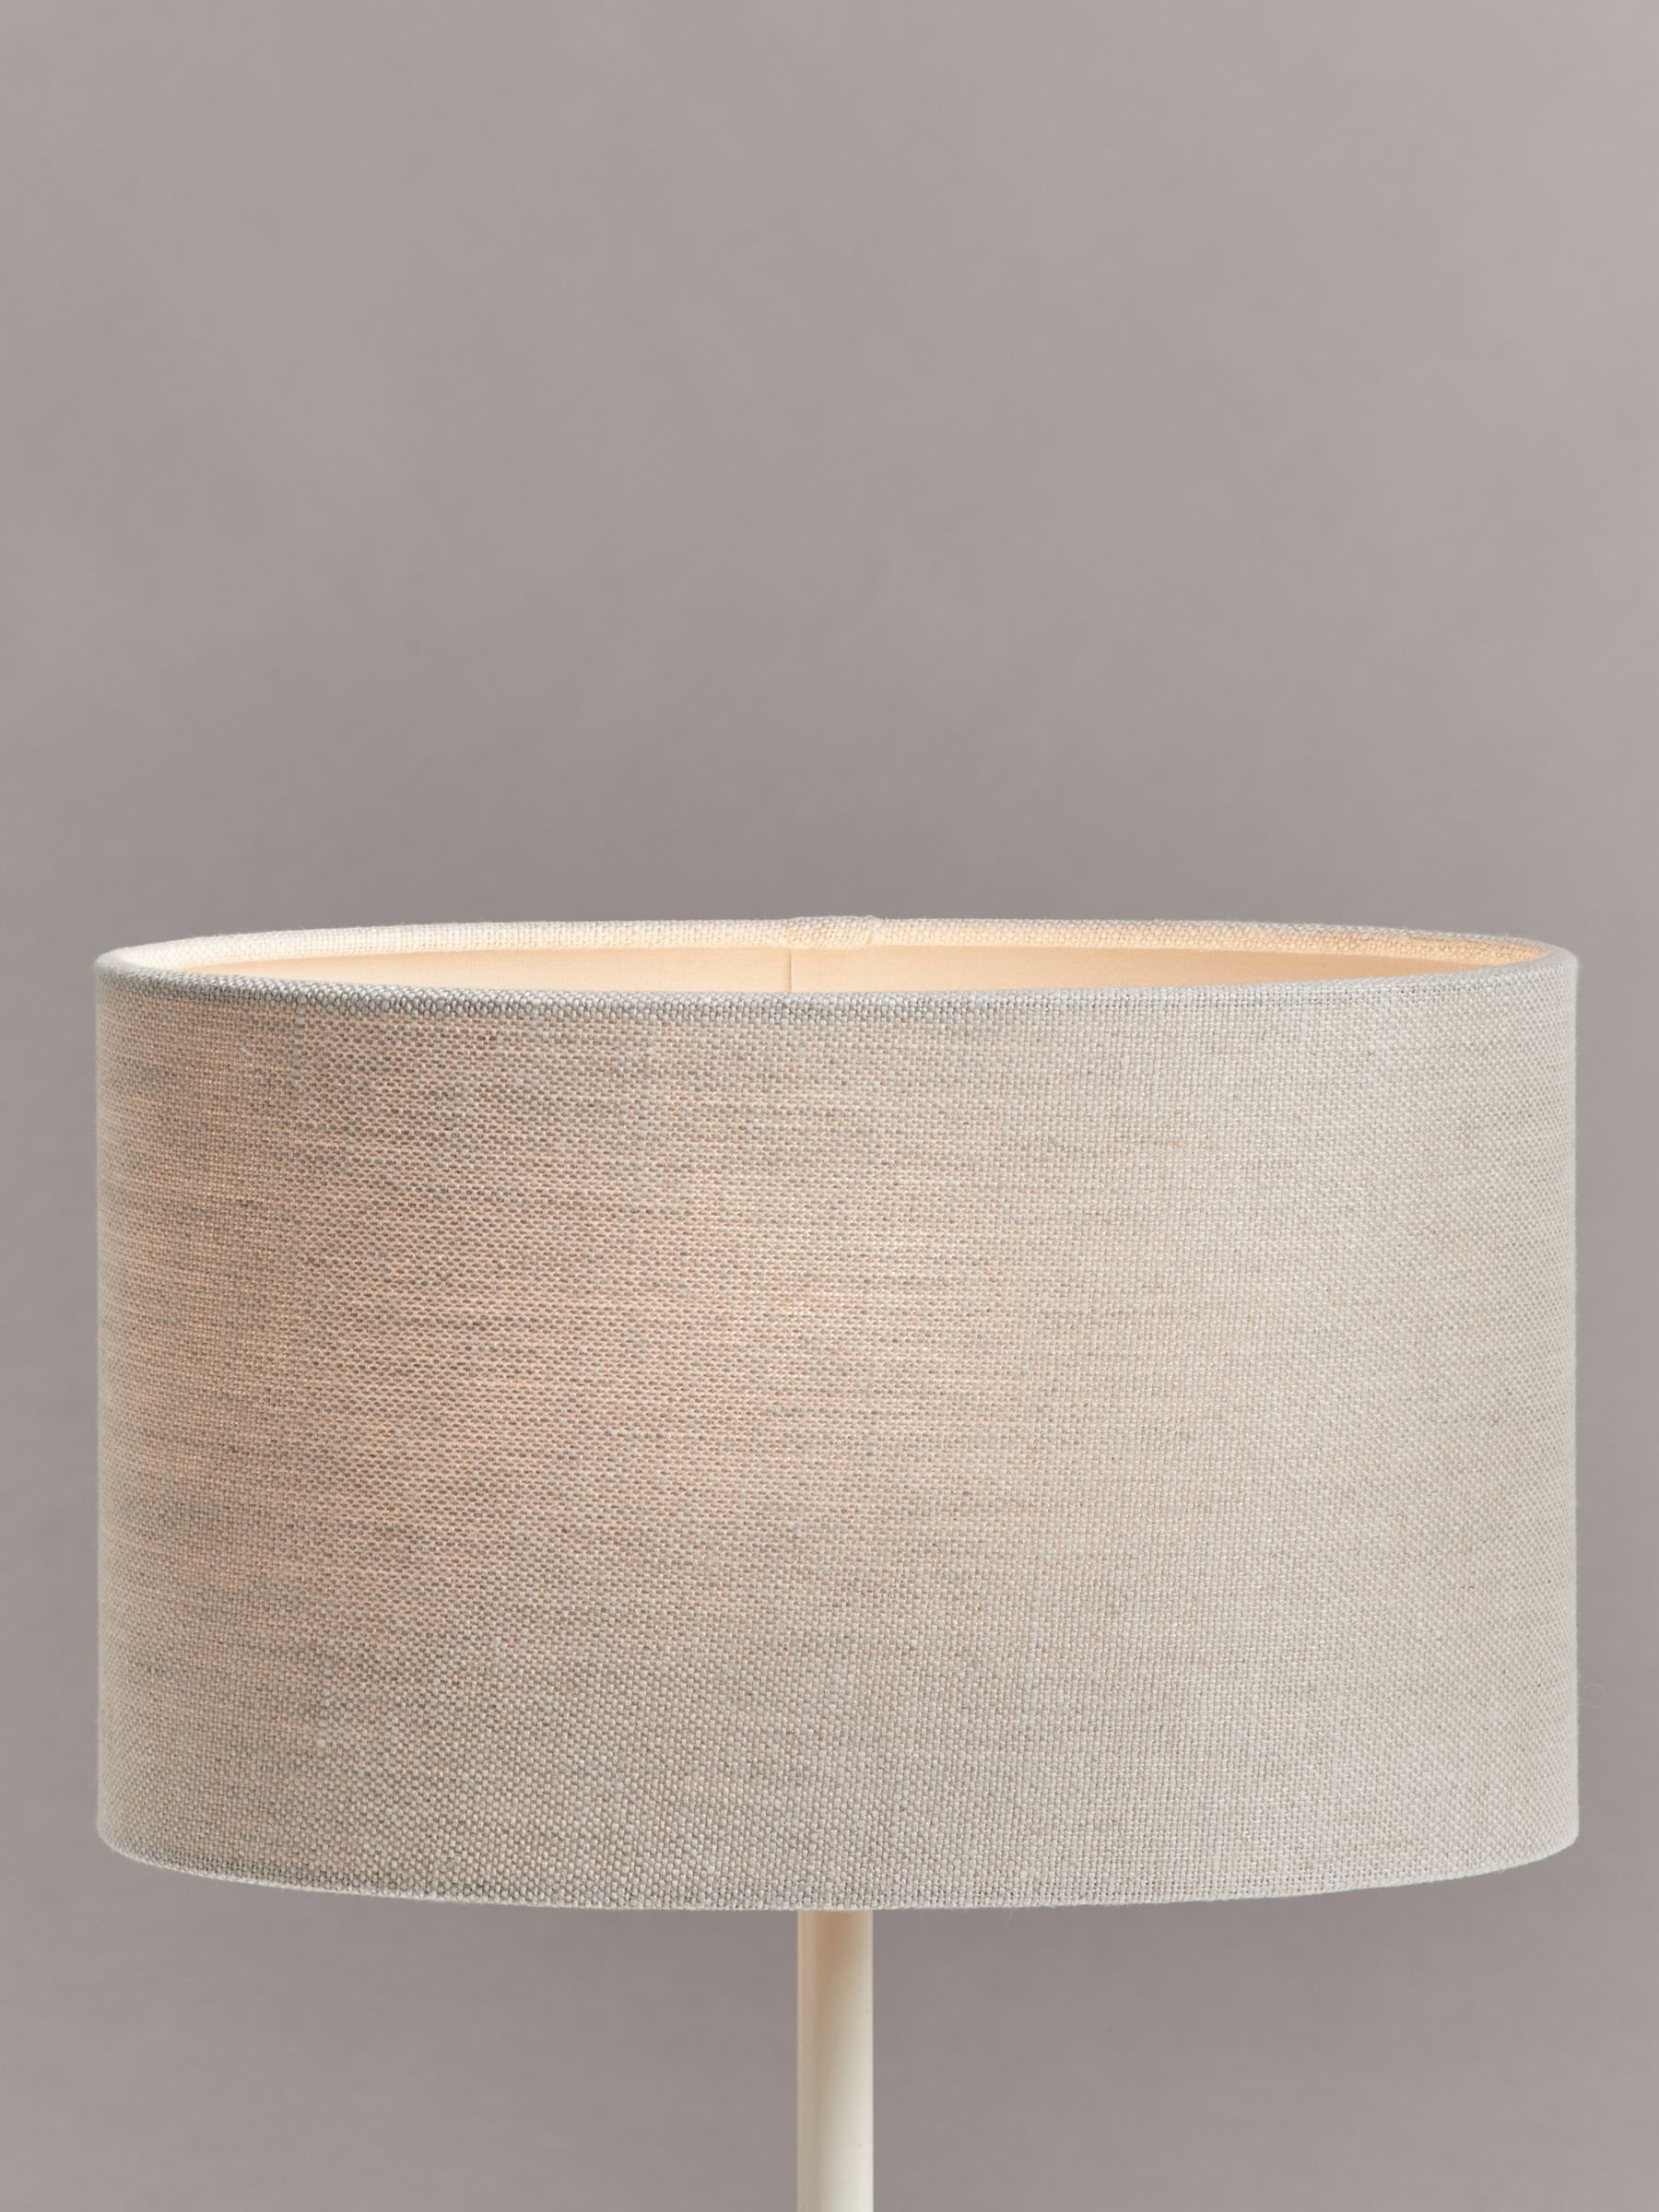 Photo of John lewis sophia pure linen oval lampshade natural